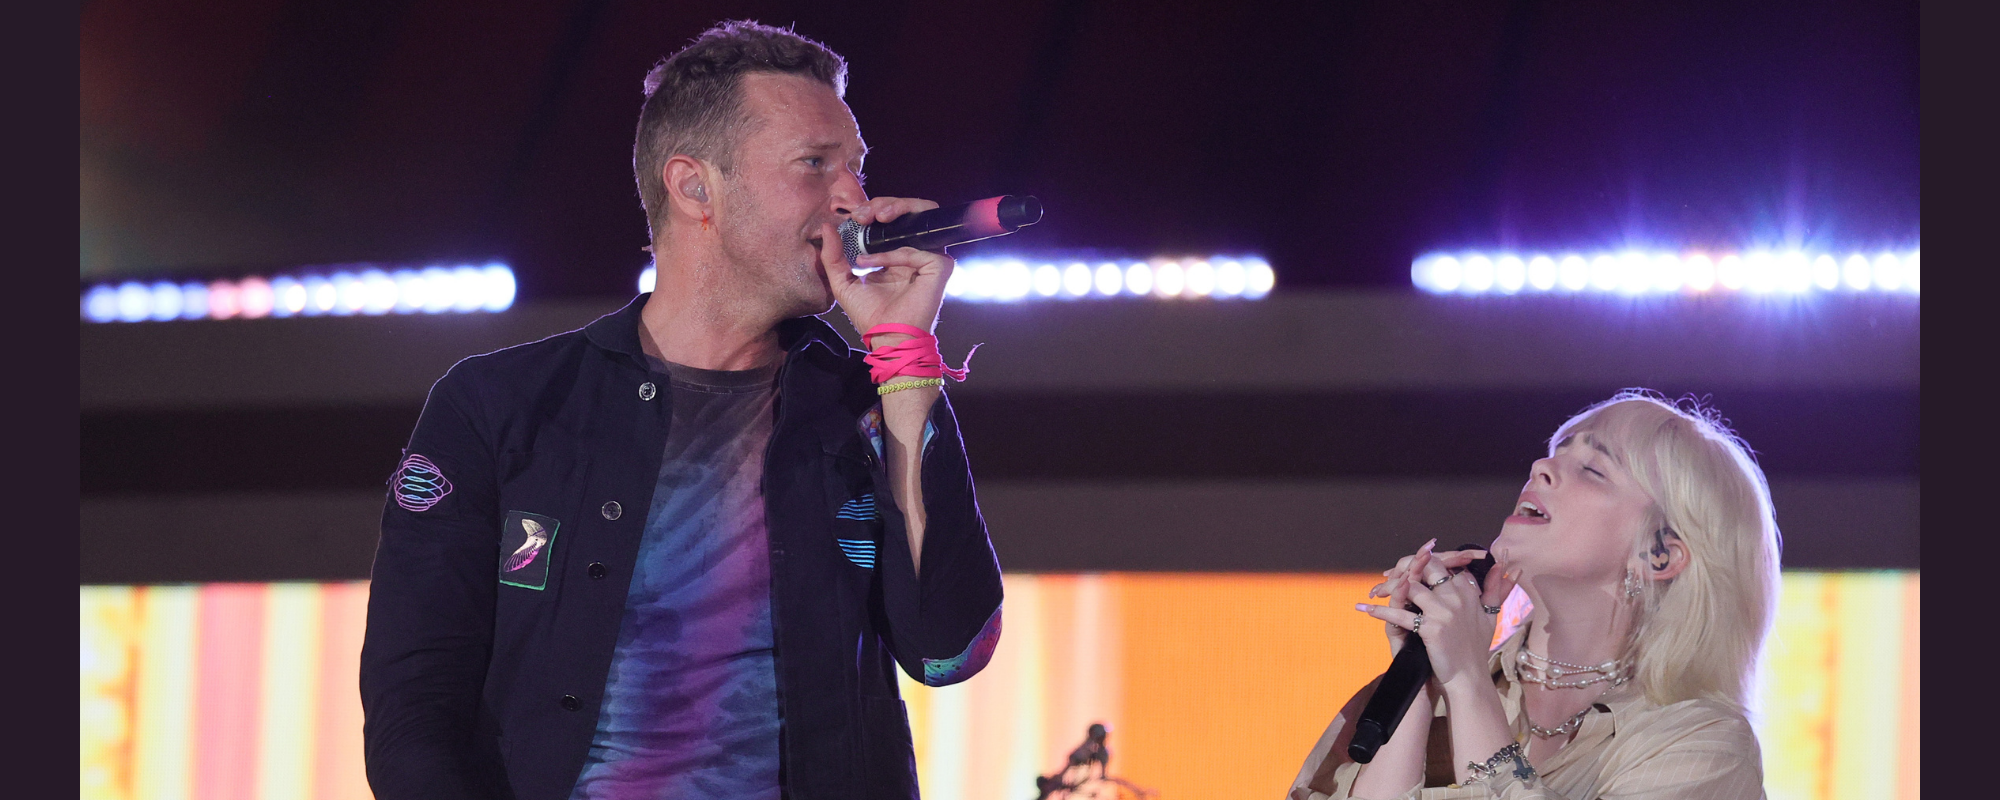 WATCH: Coldplay Performs”Fix You” Featuring Special Guests Billie Eilish & FINNEAS for Global Citizen Live